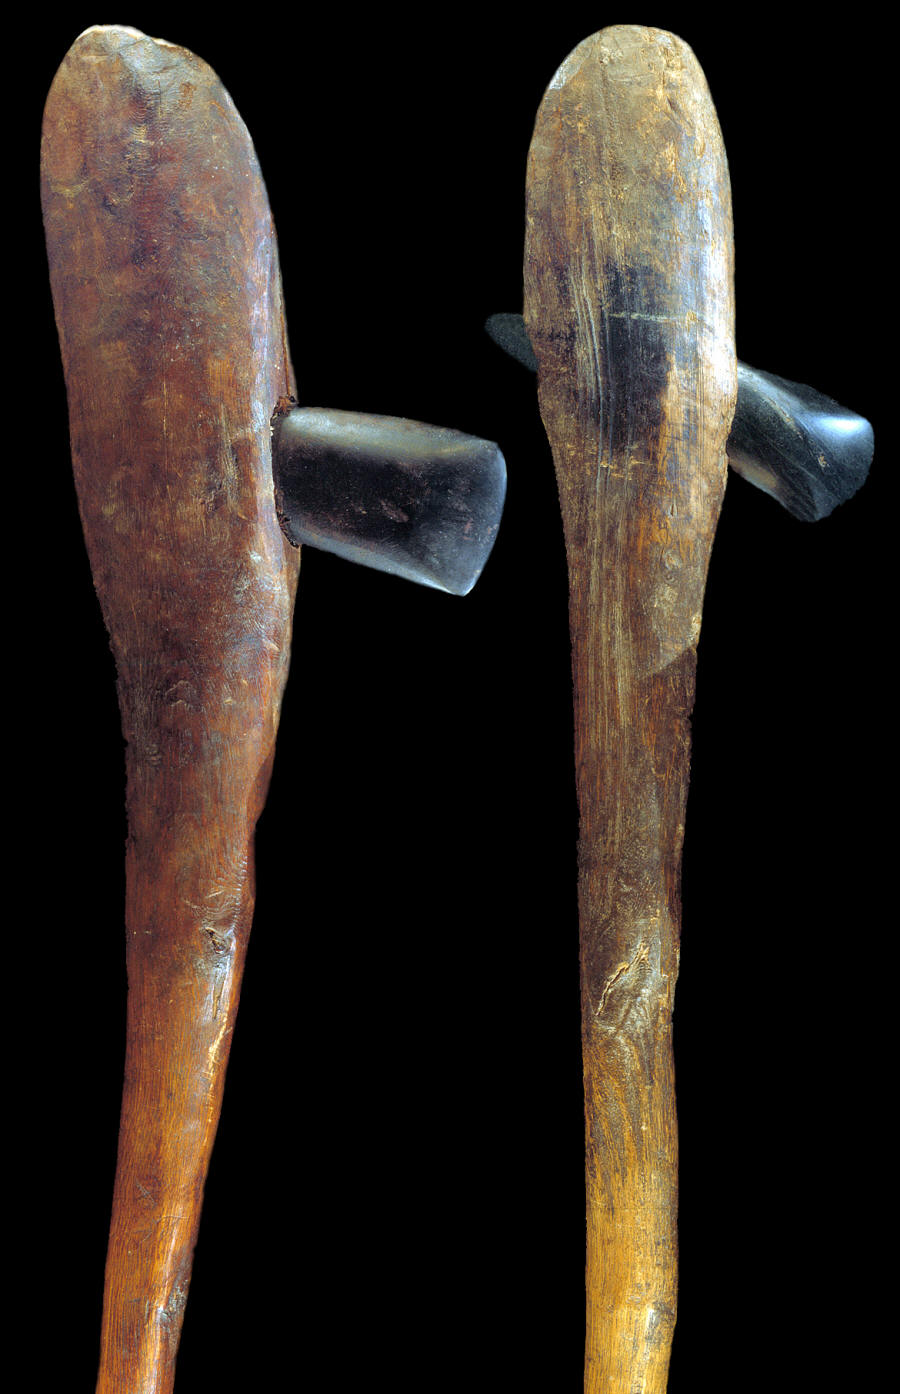 Two hafted axes from Irian Jaya, New Guinea.